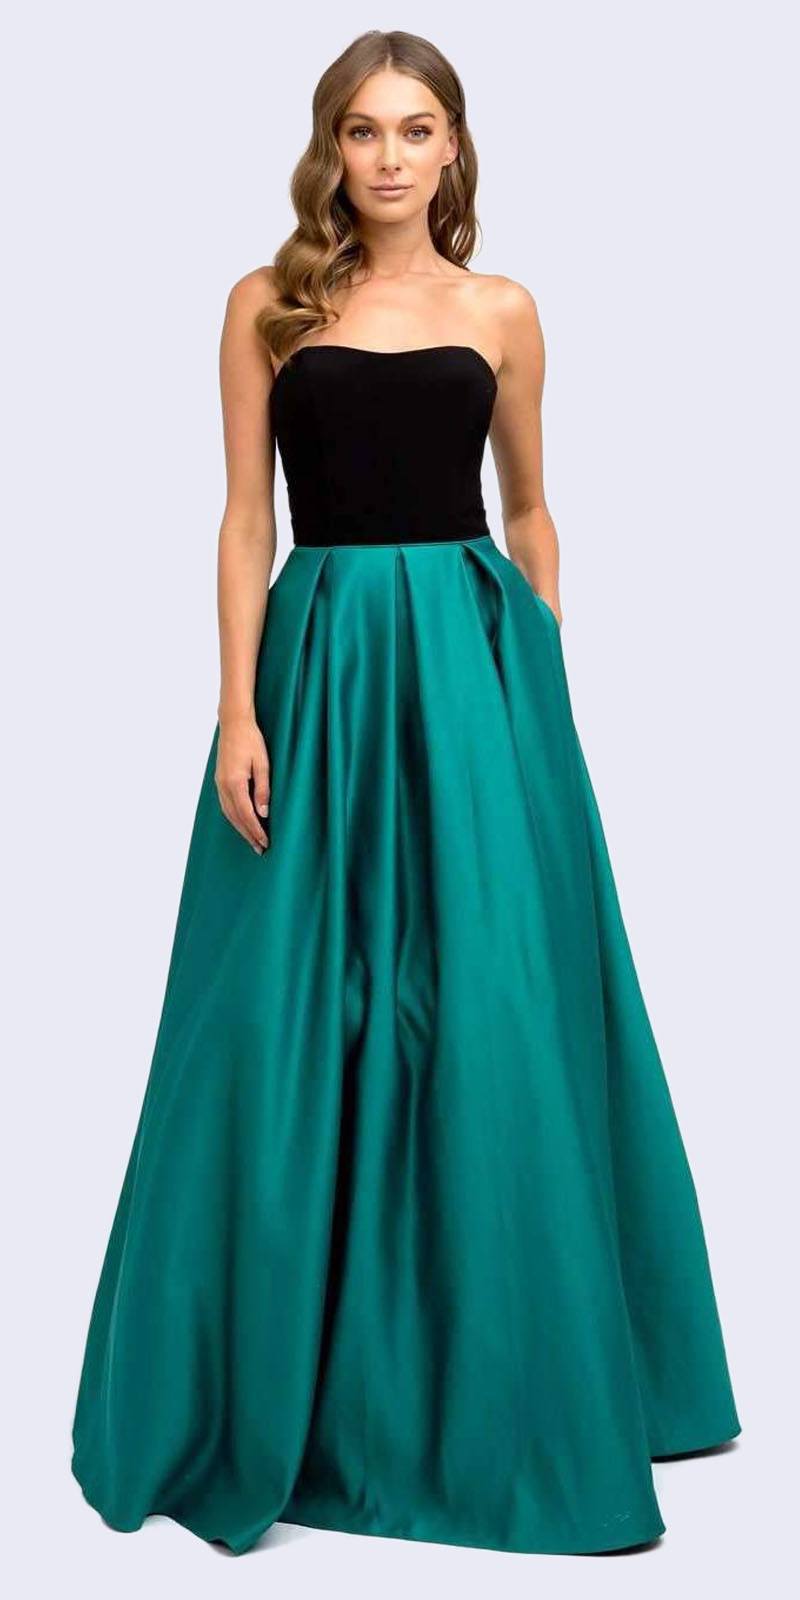 Juliet 694 Floor Length Two Tone Black/Green Sweetheart Ball Gown Style Prom Dress